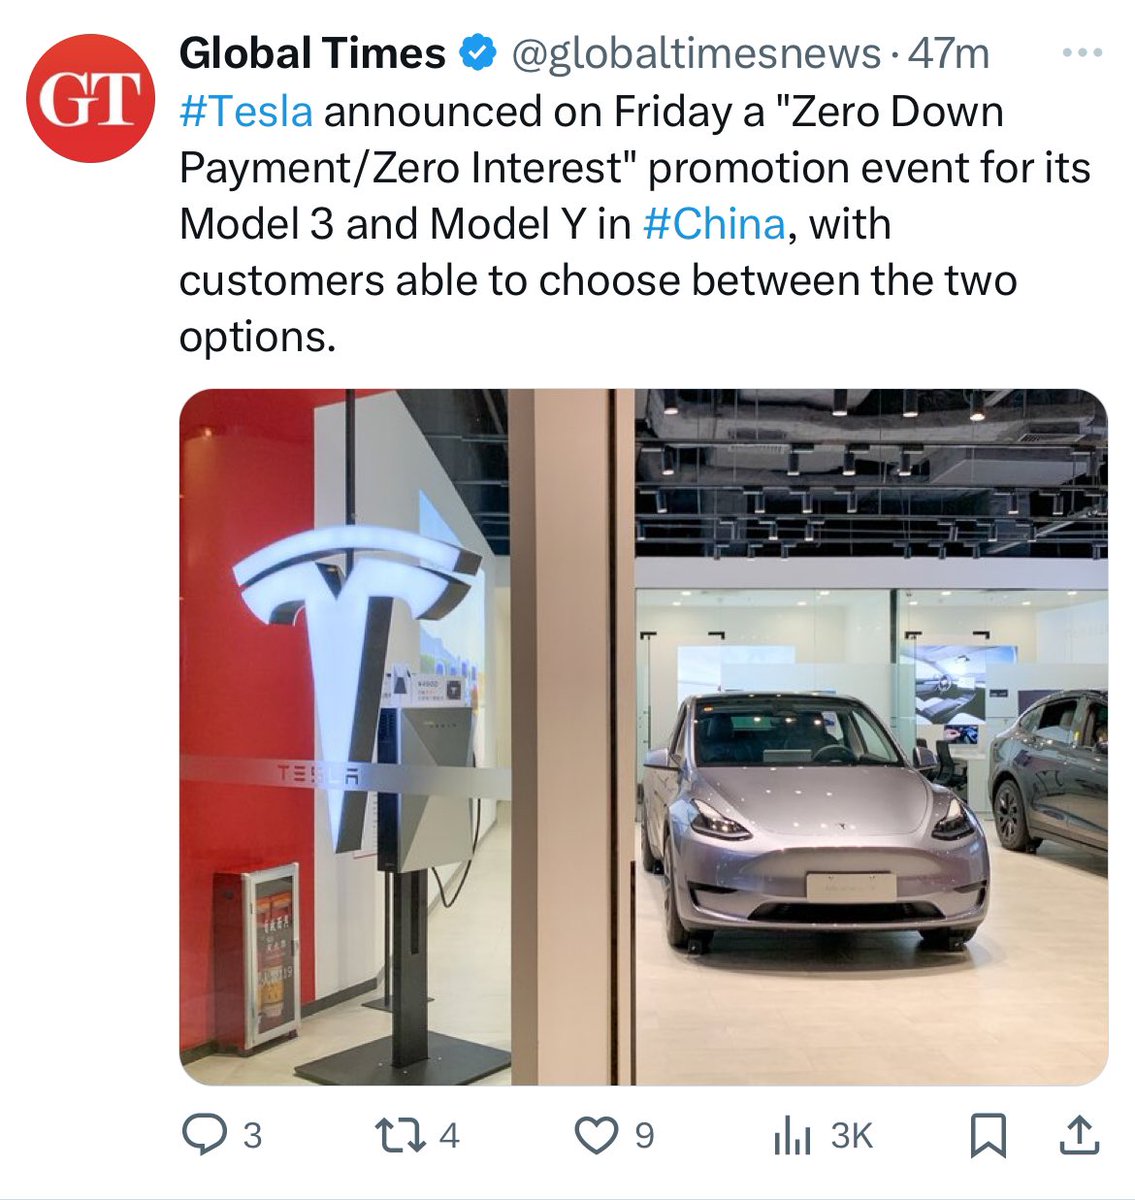 Nothing to see here, just the largest English language, Chinese government-run news outlet promoting Tesla 🇨🇳 latest car financing promotions.

When will PBS start promoting Zeekr, NIO and XPeng?